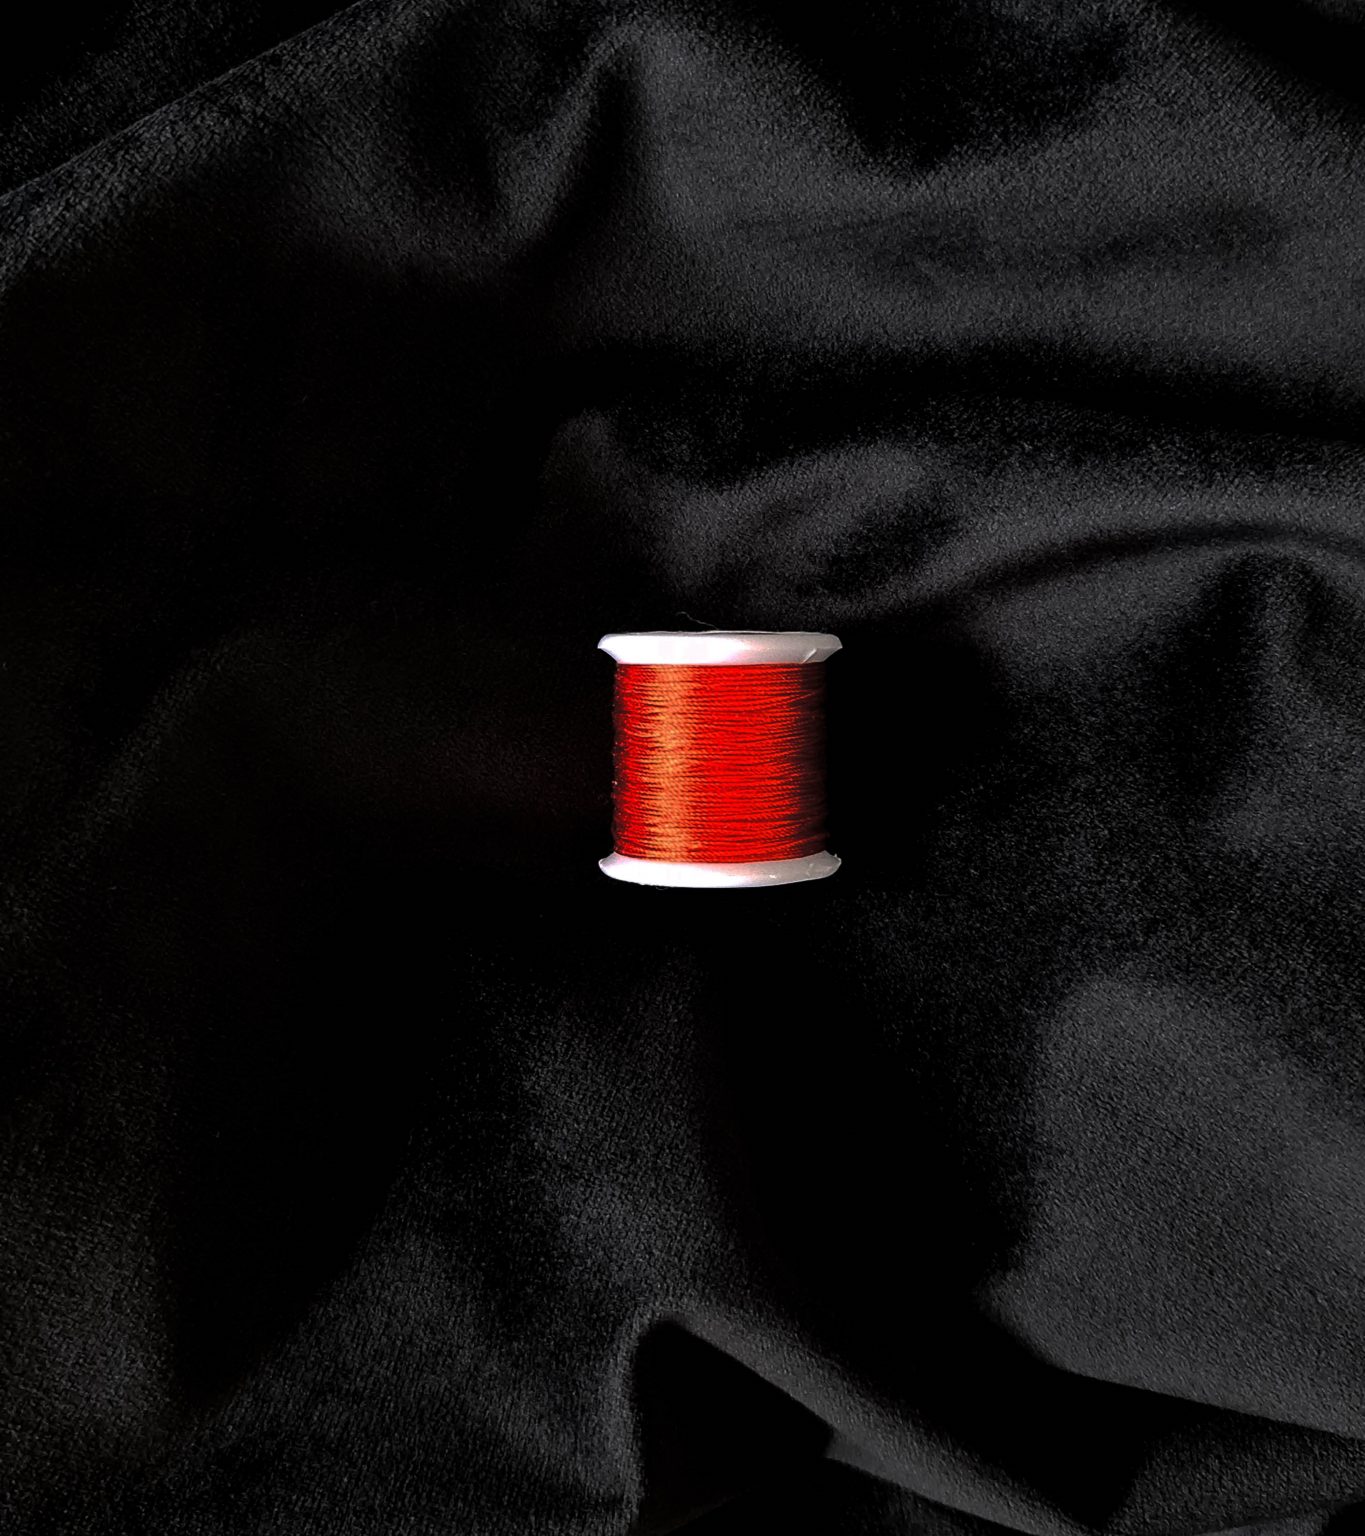 Image of a Chinese red silk spool at the centre of the image, it is laying on top of black velvet.